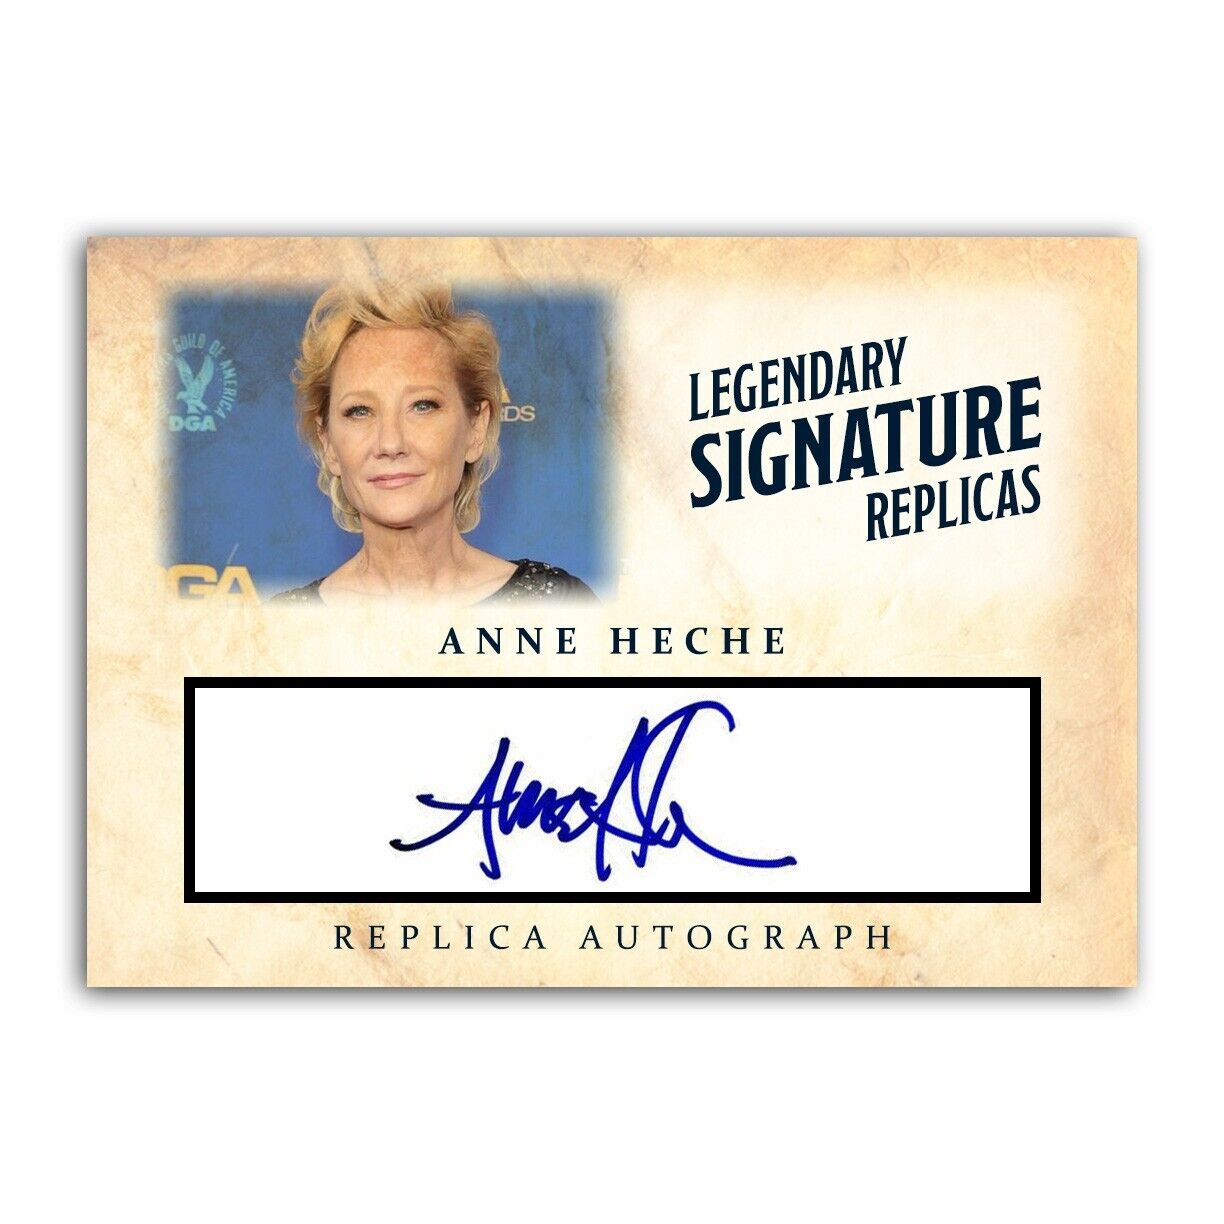 Anne Heche Actress ACEO Replica Autograph Signature Collectible Card